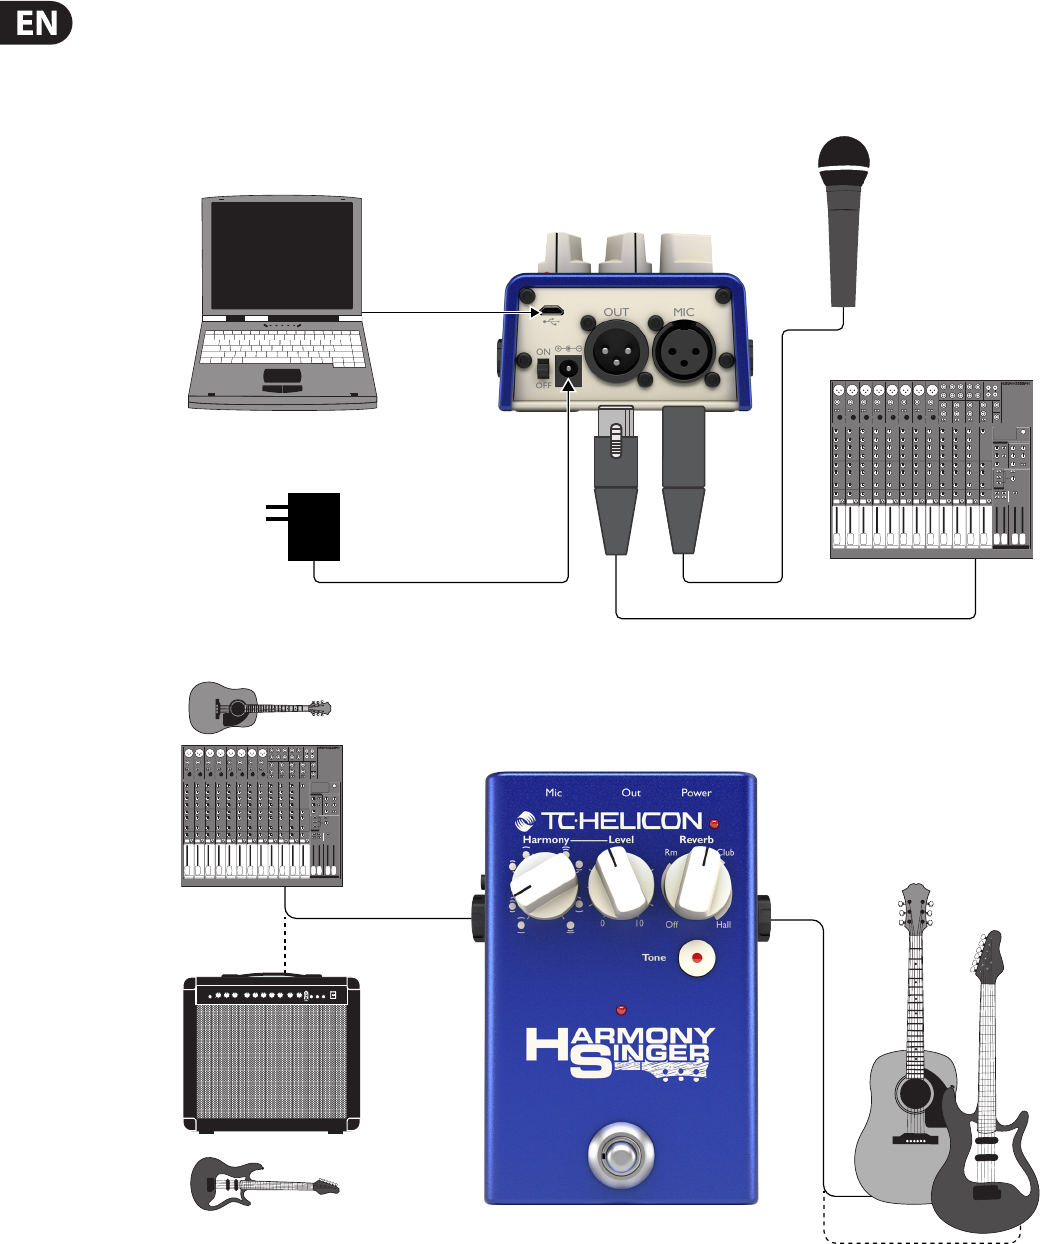 TC Helicon Harmony Singer 2 Vocal Effects Pedal Bundle with R21S Cardioid Dynamic Microphone 1/4 10-FT Balanced XLR Cable and 10 Straight Instrument Cable Blucoil Slim 9V Power Supply AC Adapter 